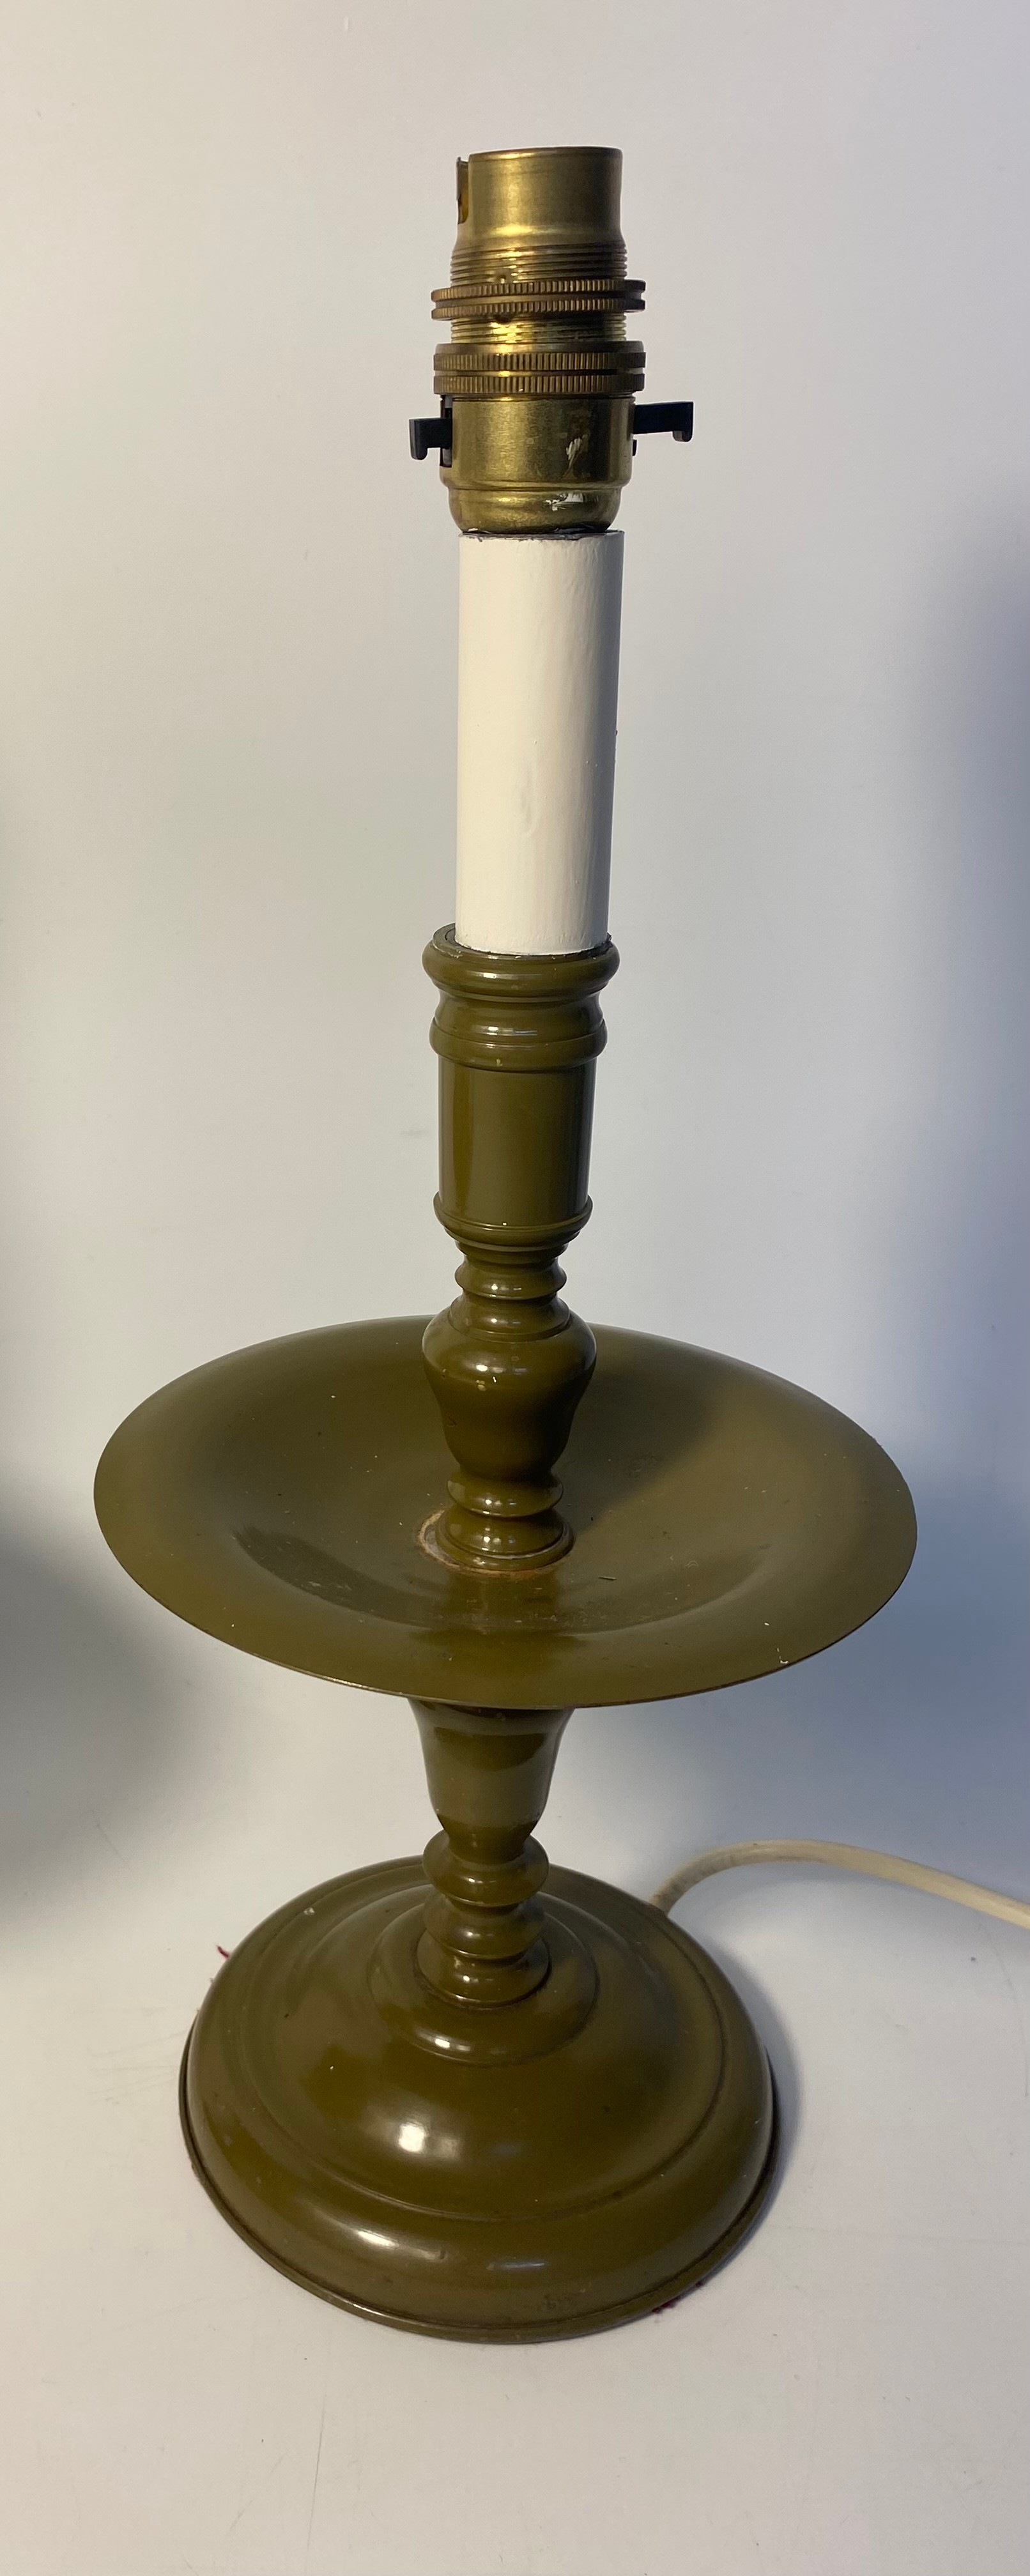 A Pair of 1930/40s enamelled industrial candle sticks [Converted to table lamps] - Image 4 of 5